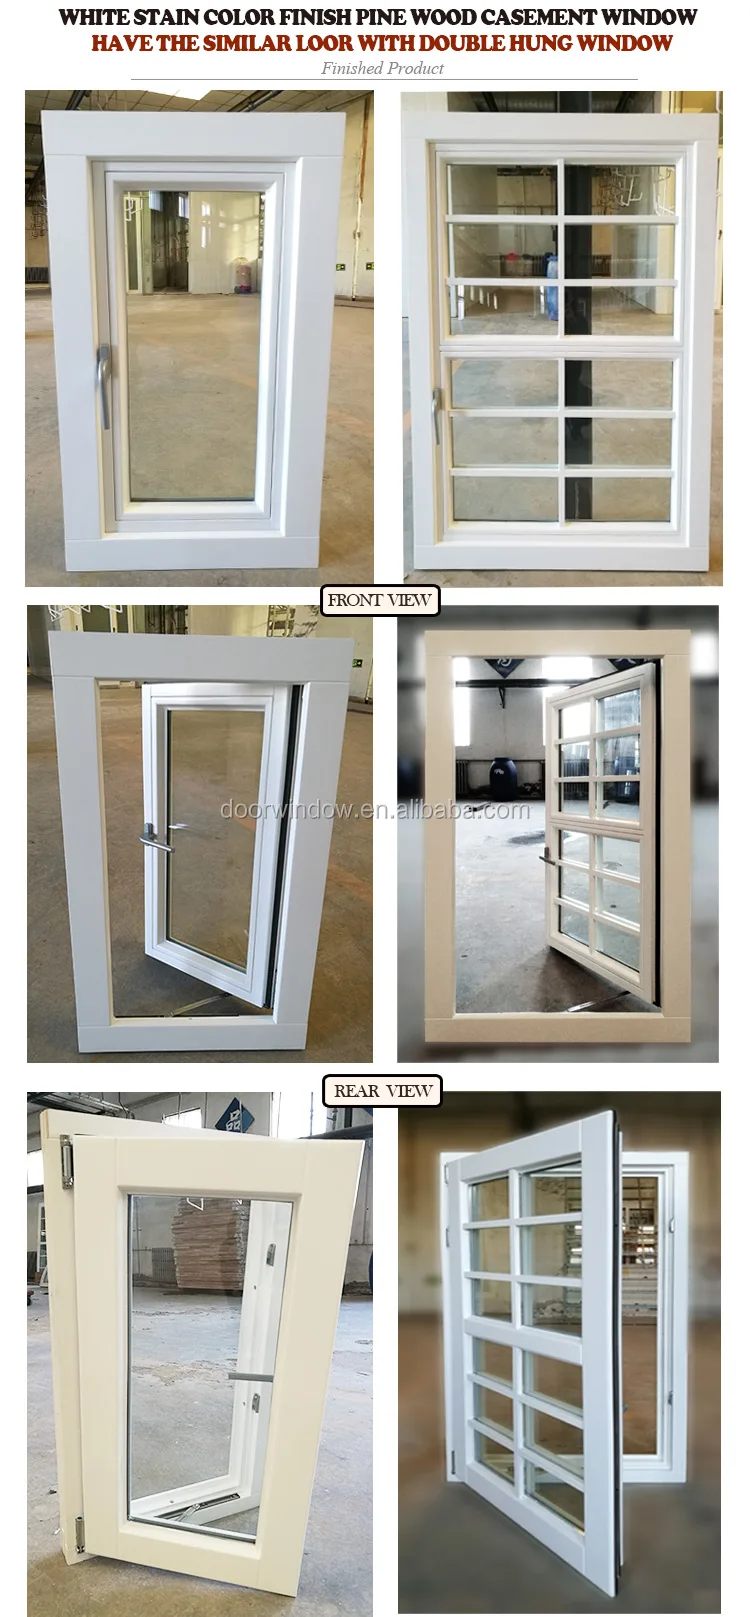 Virginia Hollow glass awning window with american style high quality 30 x 53 replacement windows